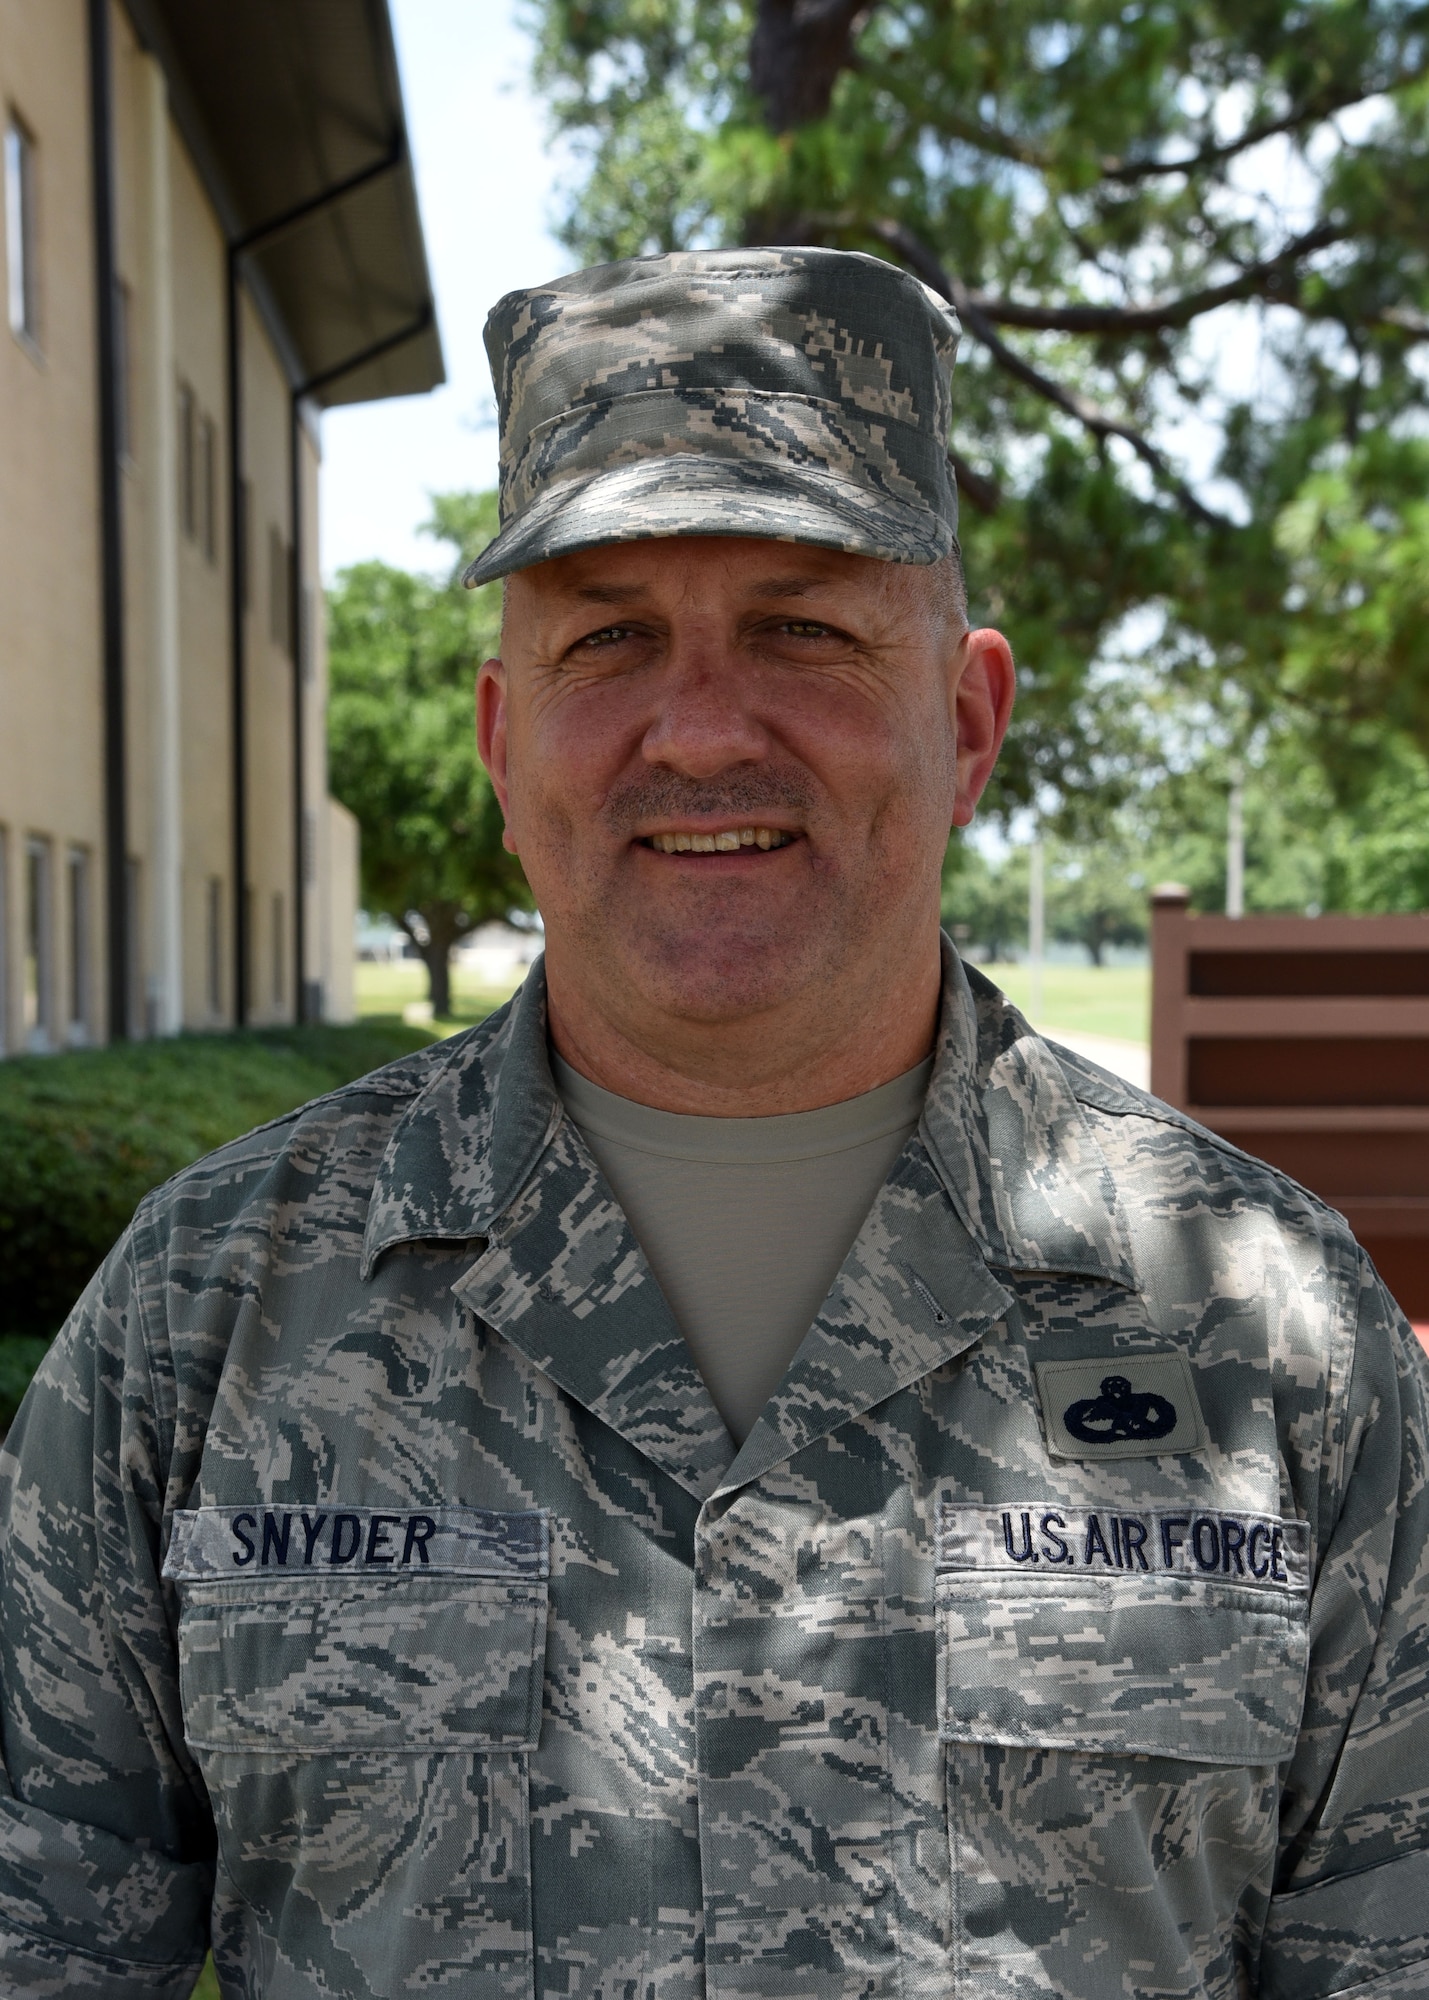 Chief Master Sgt. Monte Snyder in one of three master resiliency trainers for the 403rd Wing, Keesler Air Force Base, Mississippi. He assists with teaching first term Airmen in nine areas that enhance resilience, one of the core tenets of the Air Force’s Comprehensive Airman Fitness, which encompasses creating Airmen with solid mental, physical, social and spiritual well-being. (U.S. Air Force photo/Lt. Col. Marnee A.C. Losurdo)